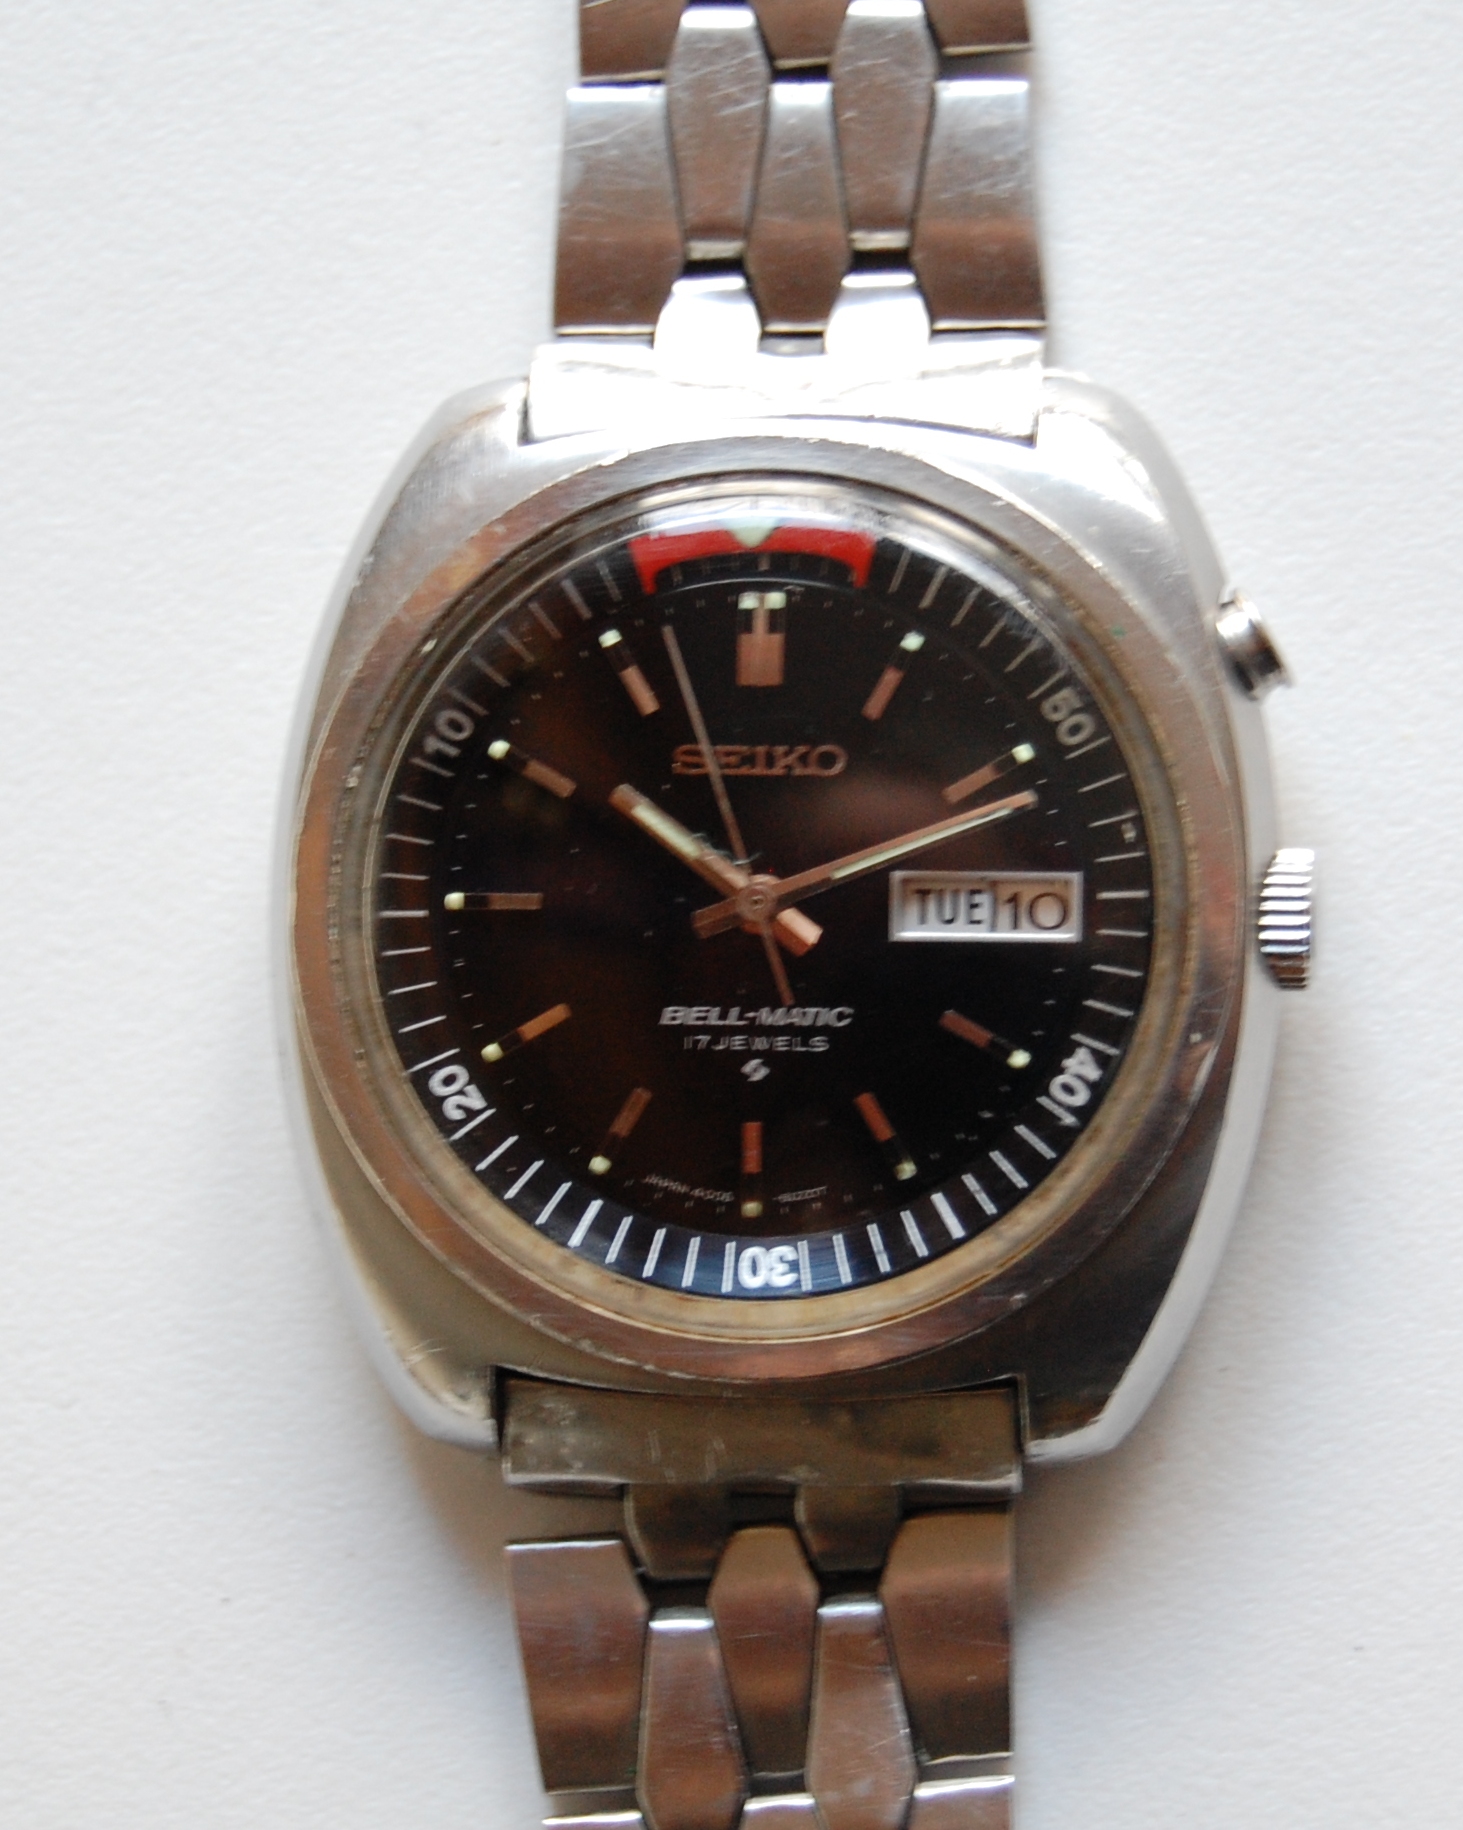 SOLD 1971 Seiko Bell-Matic alarm automatic men's watch - Birth Year Watches